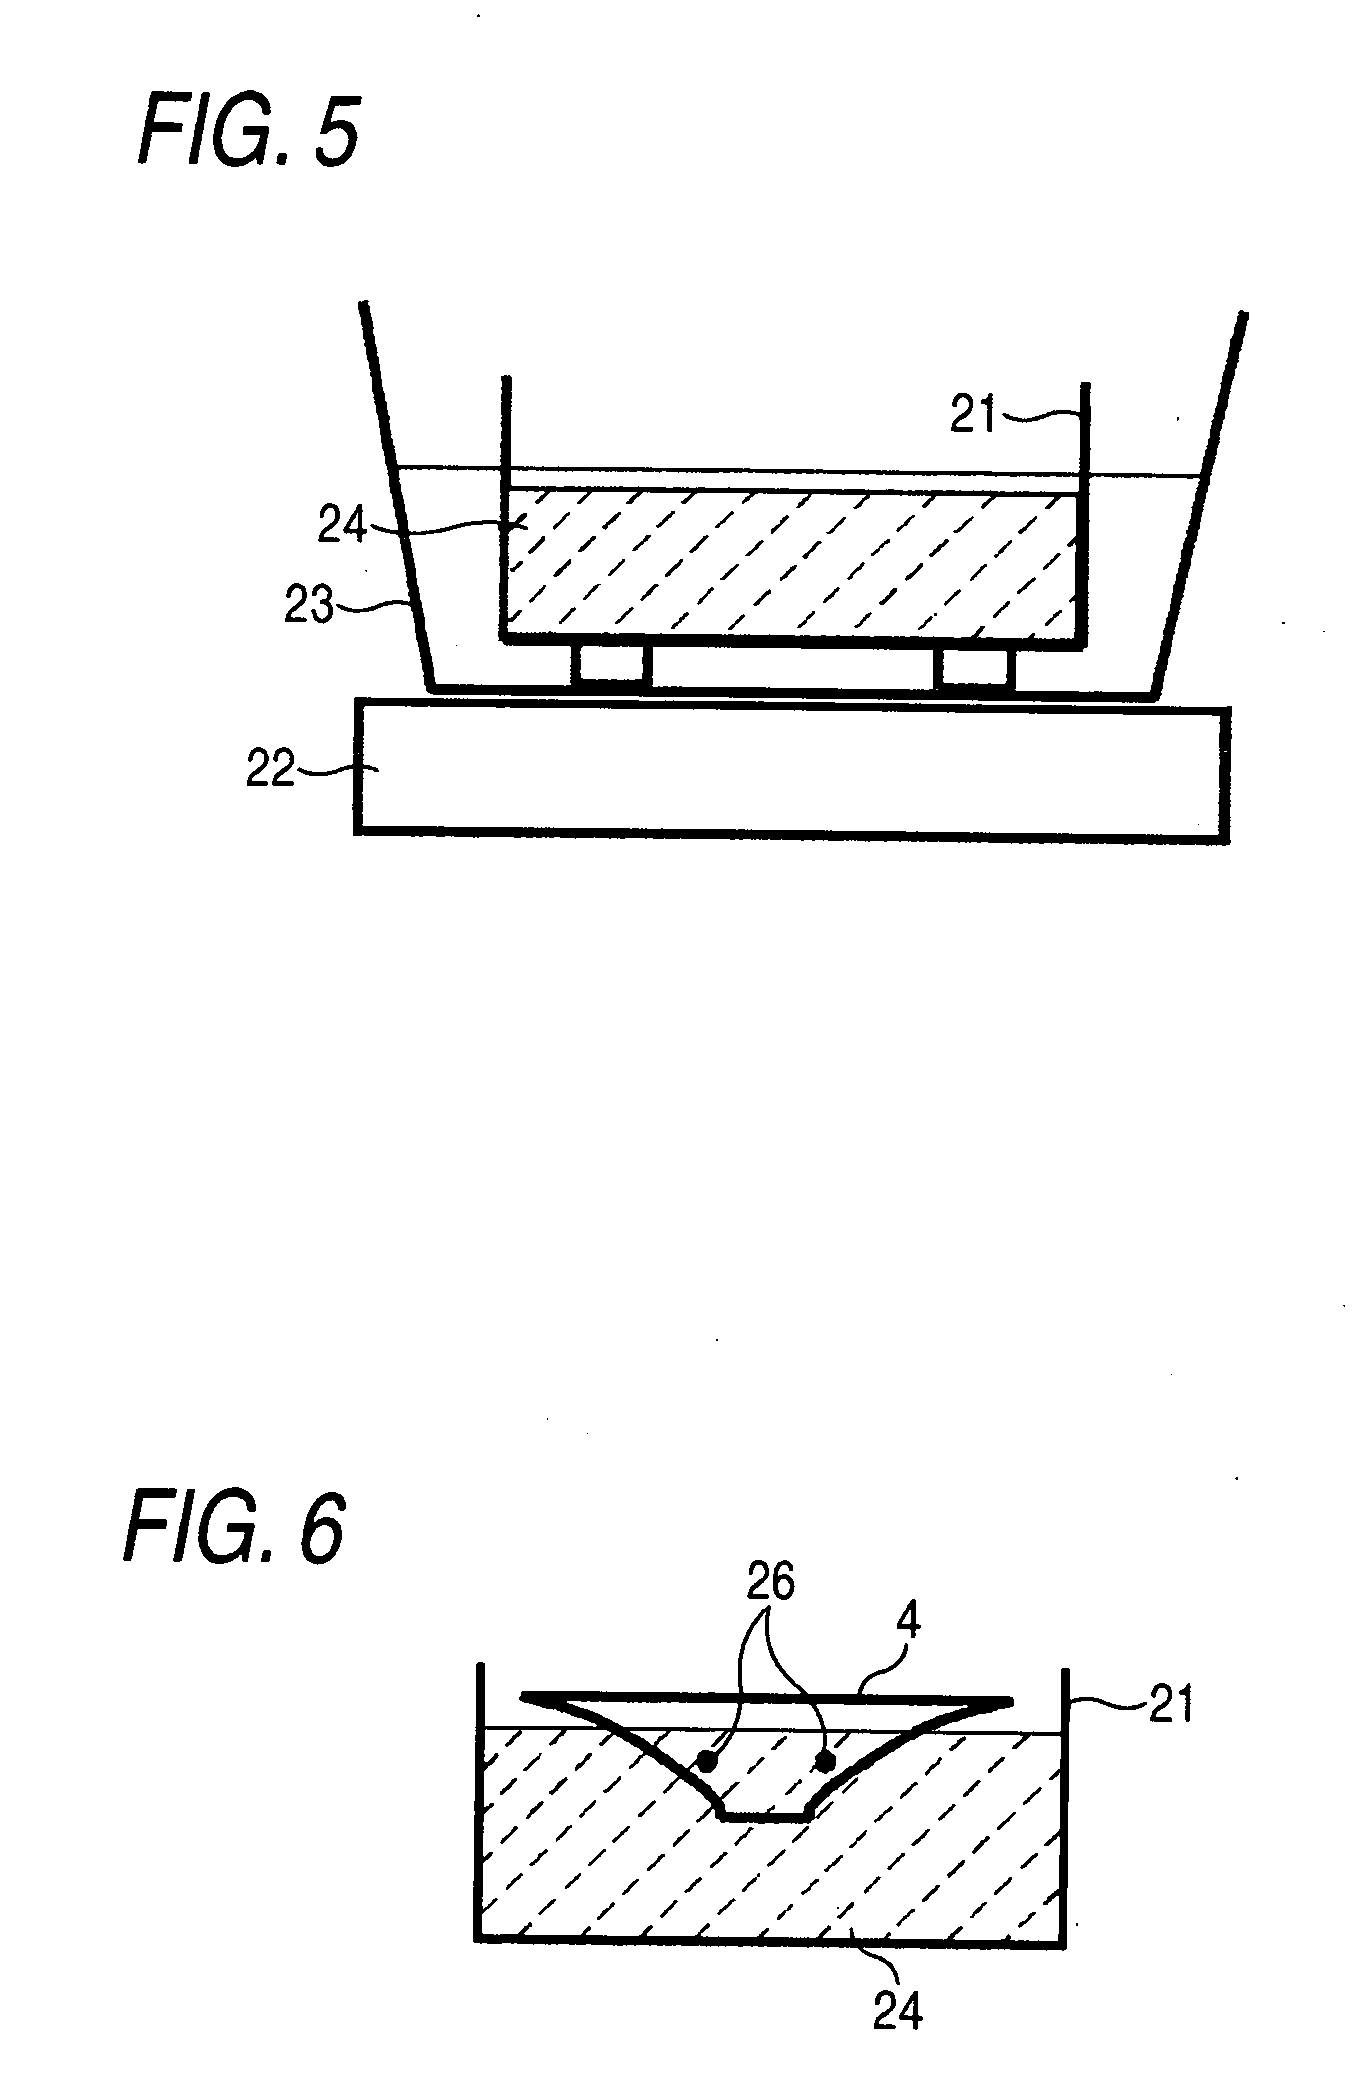 Speaker component, method of manufacturing the same and speaker apparatus including the same